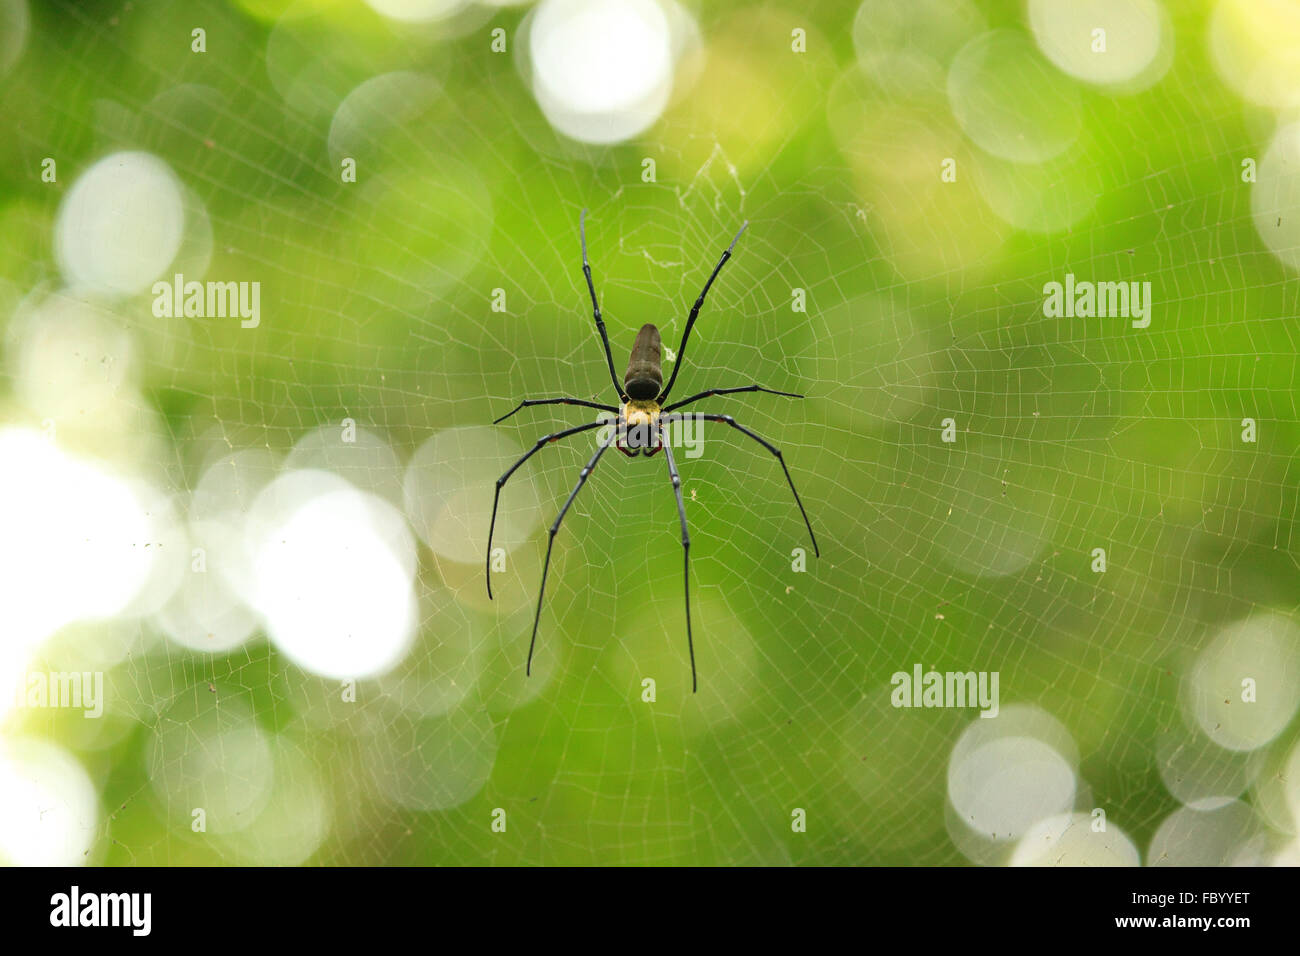 Australian spider from Daintree river area Stock Photo